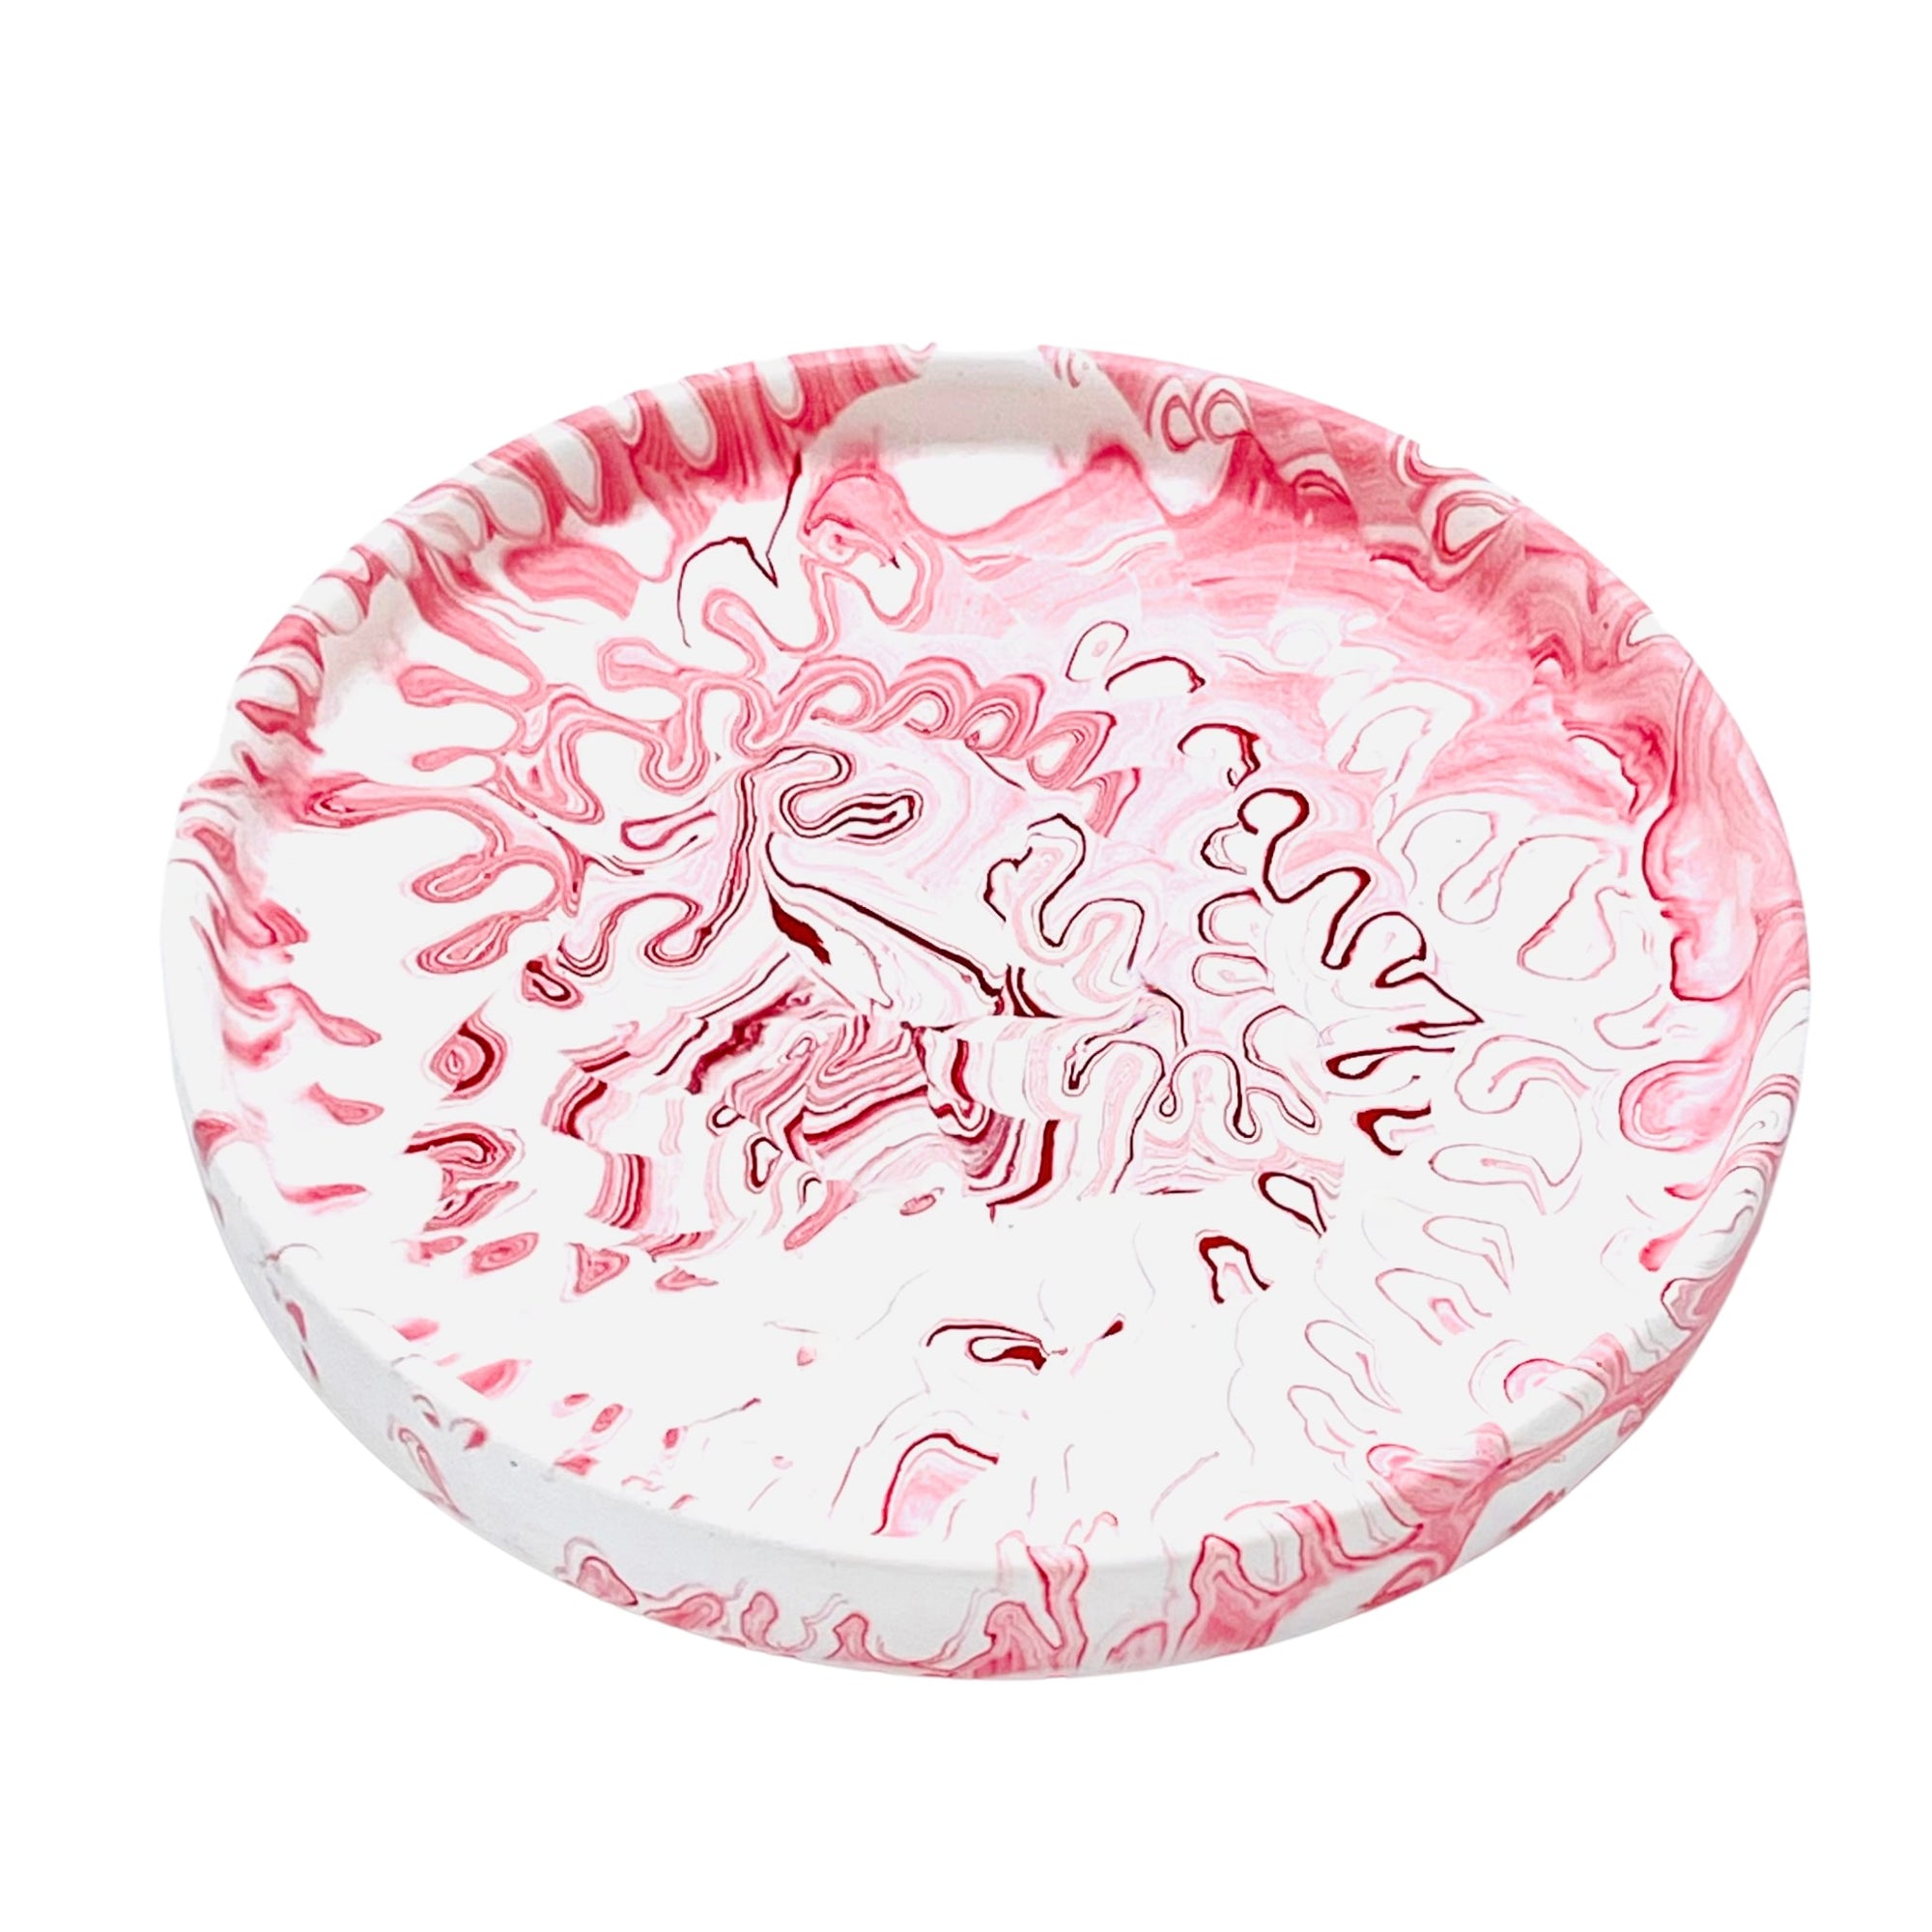 A circular Jesmonite trinket tray measuring 15.4cm in diameter marbled with red pigment.